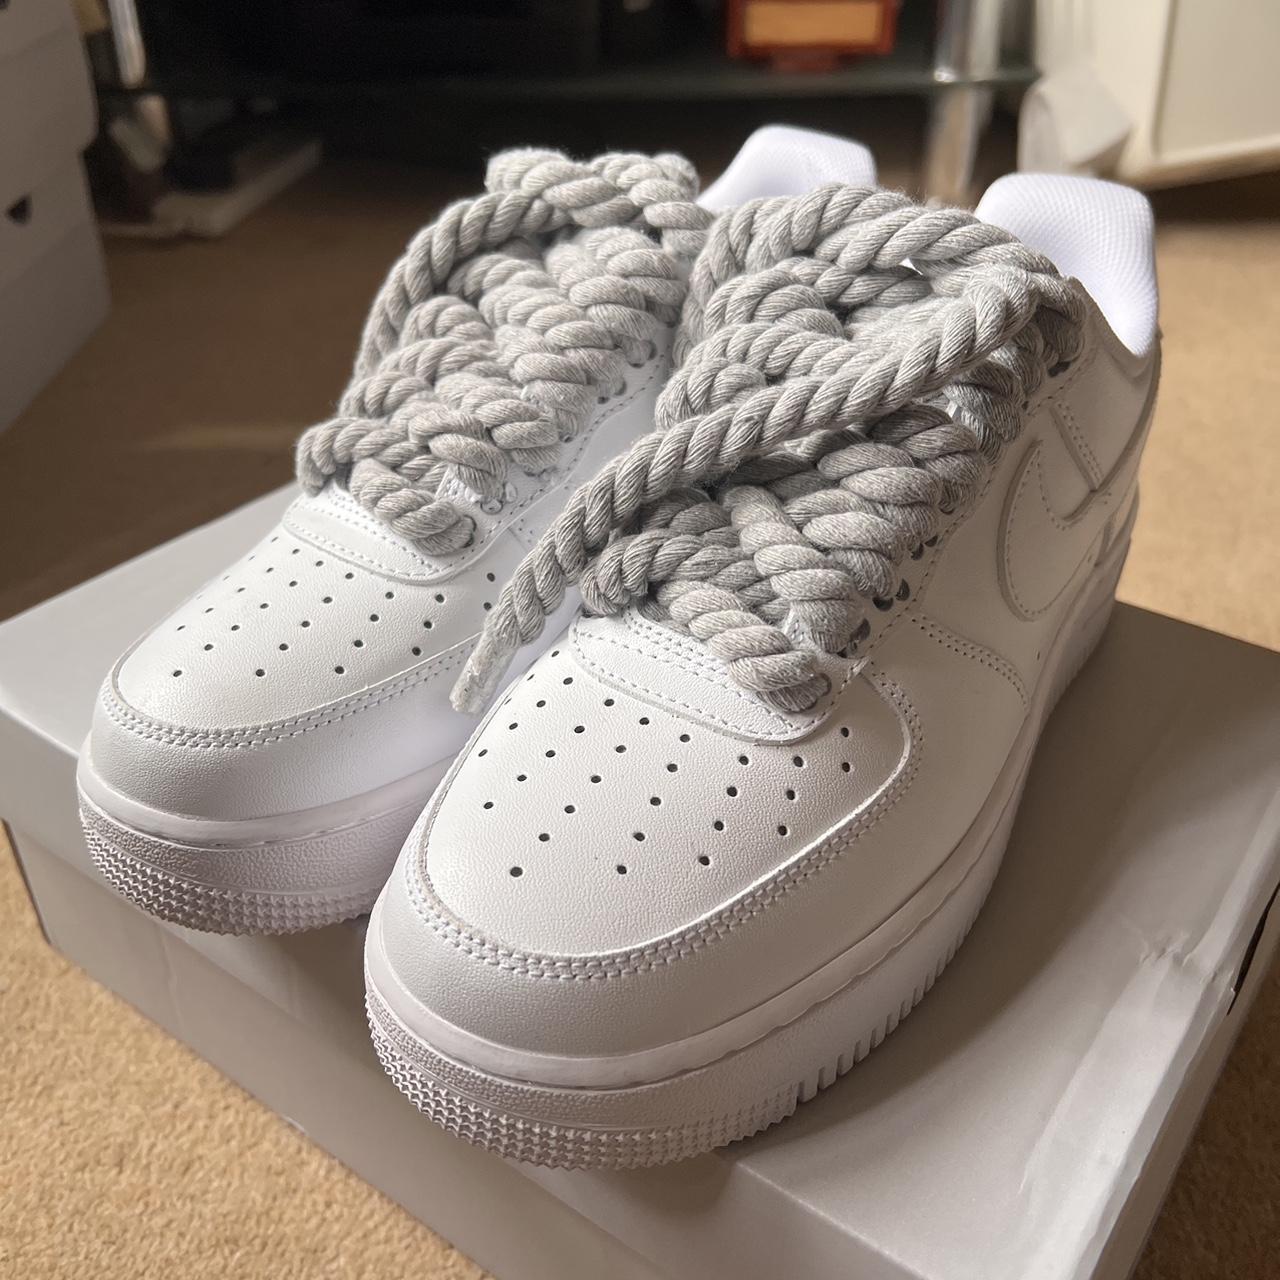 Af1 roped White All sizes available Drop me a... - Depop